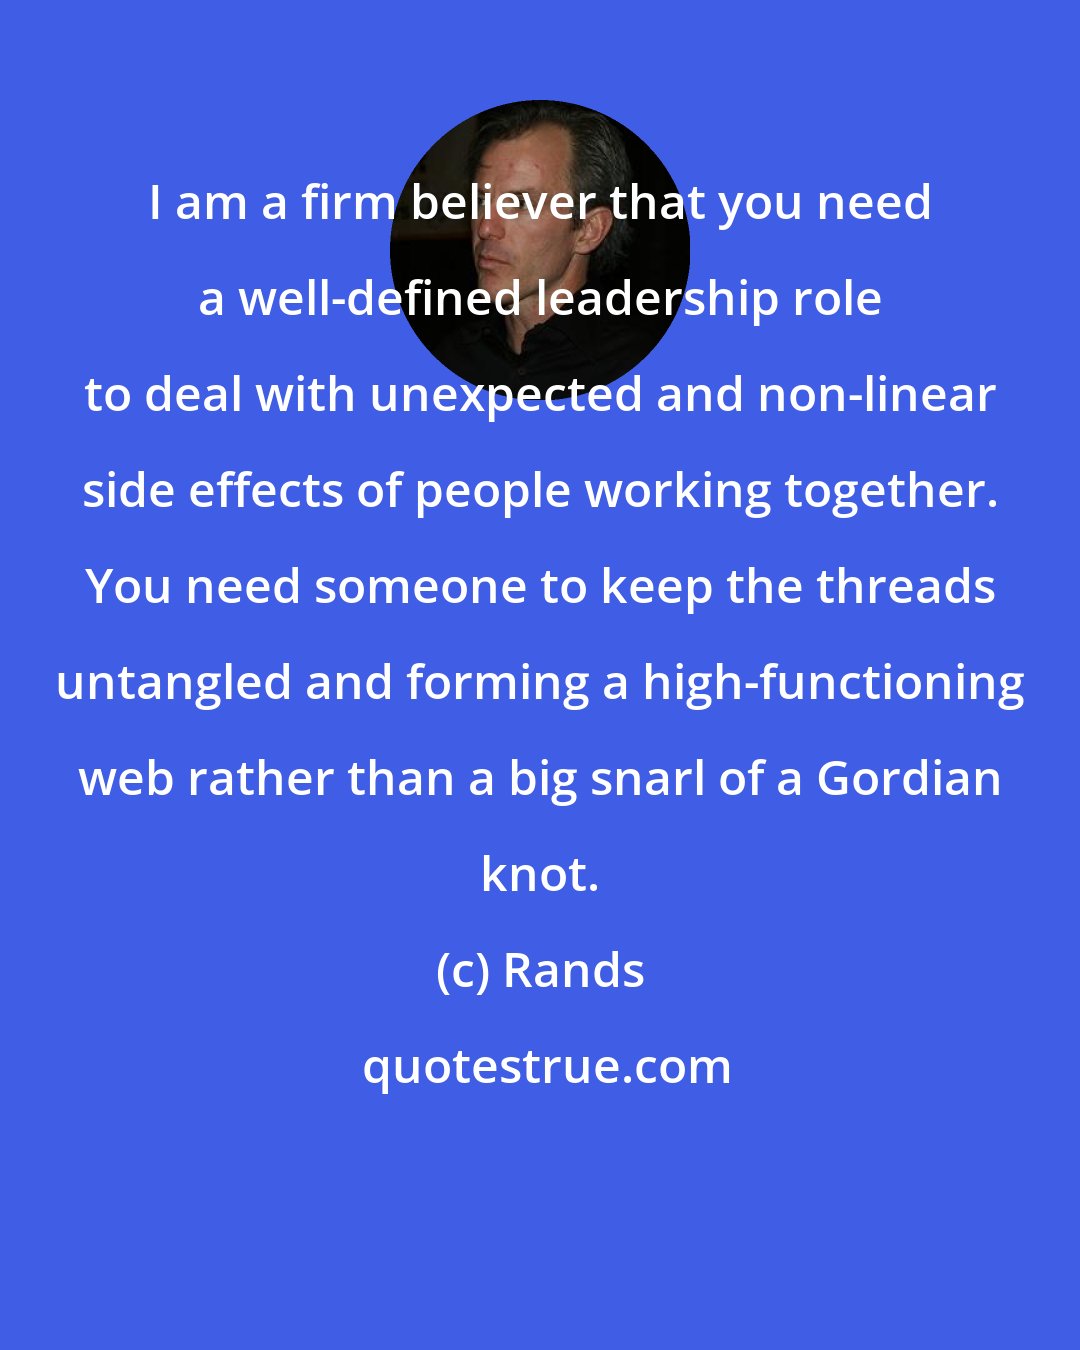 Rands: I am a firm believer that you need a well-defined leadership role to deal with unexpected and non-linear side effects of people working together. You need someone to keep the threads untangled and forming a high-functioning web rather than a big snarl of a Gordian knot.